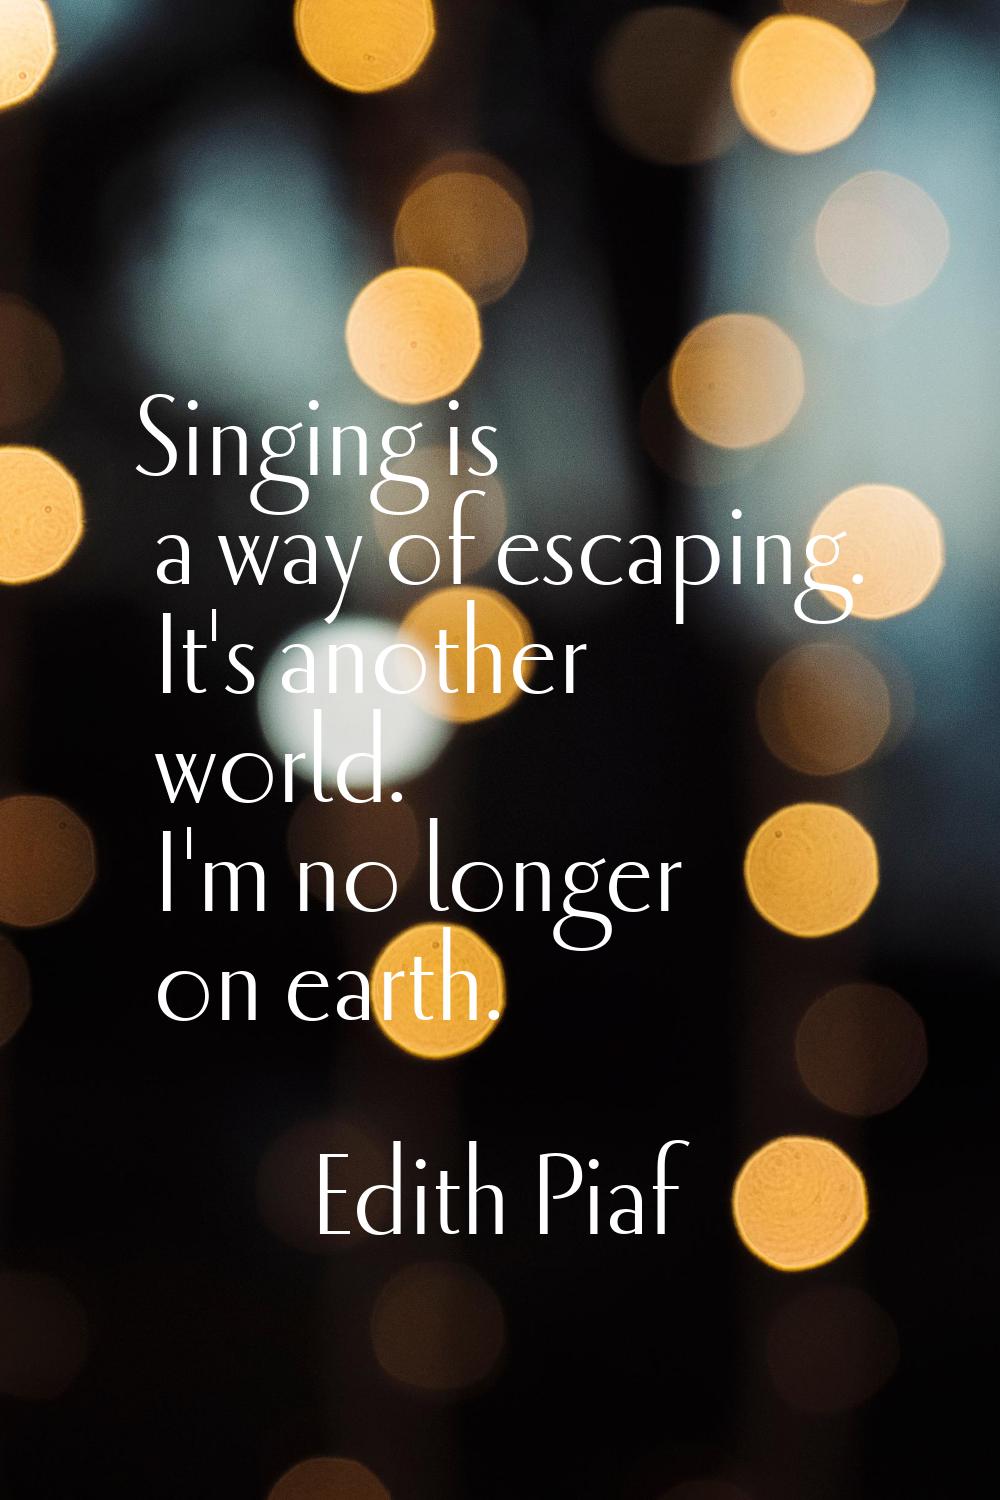 Singing is a way of escaping. It's another world. I'm no longer on earth.